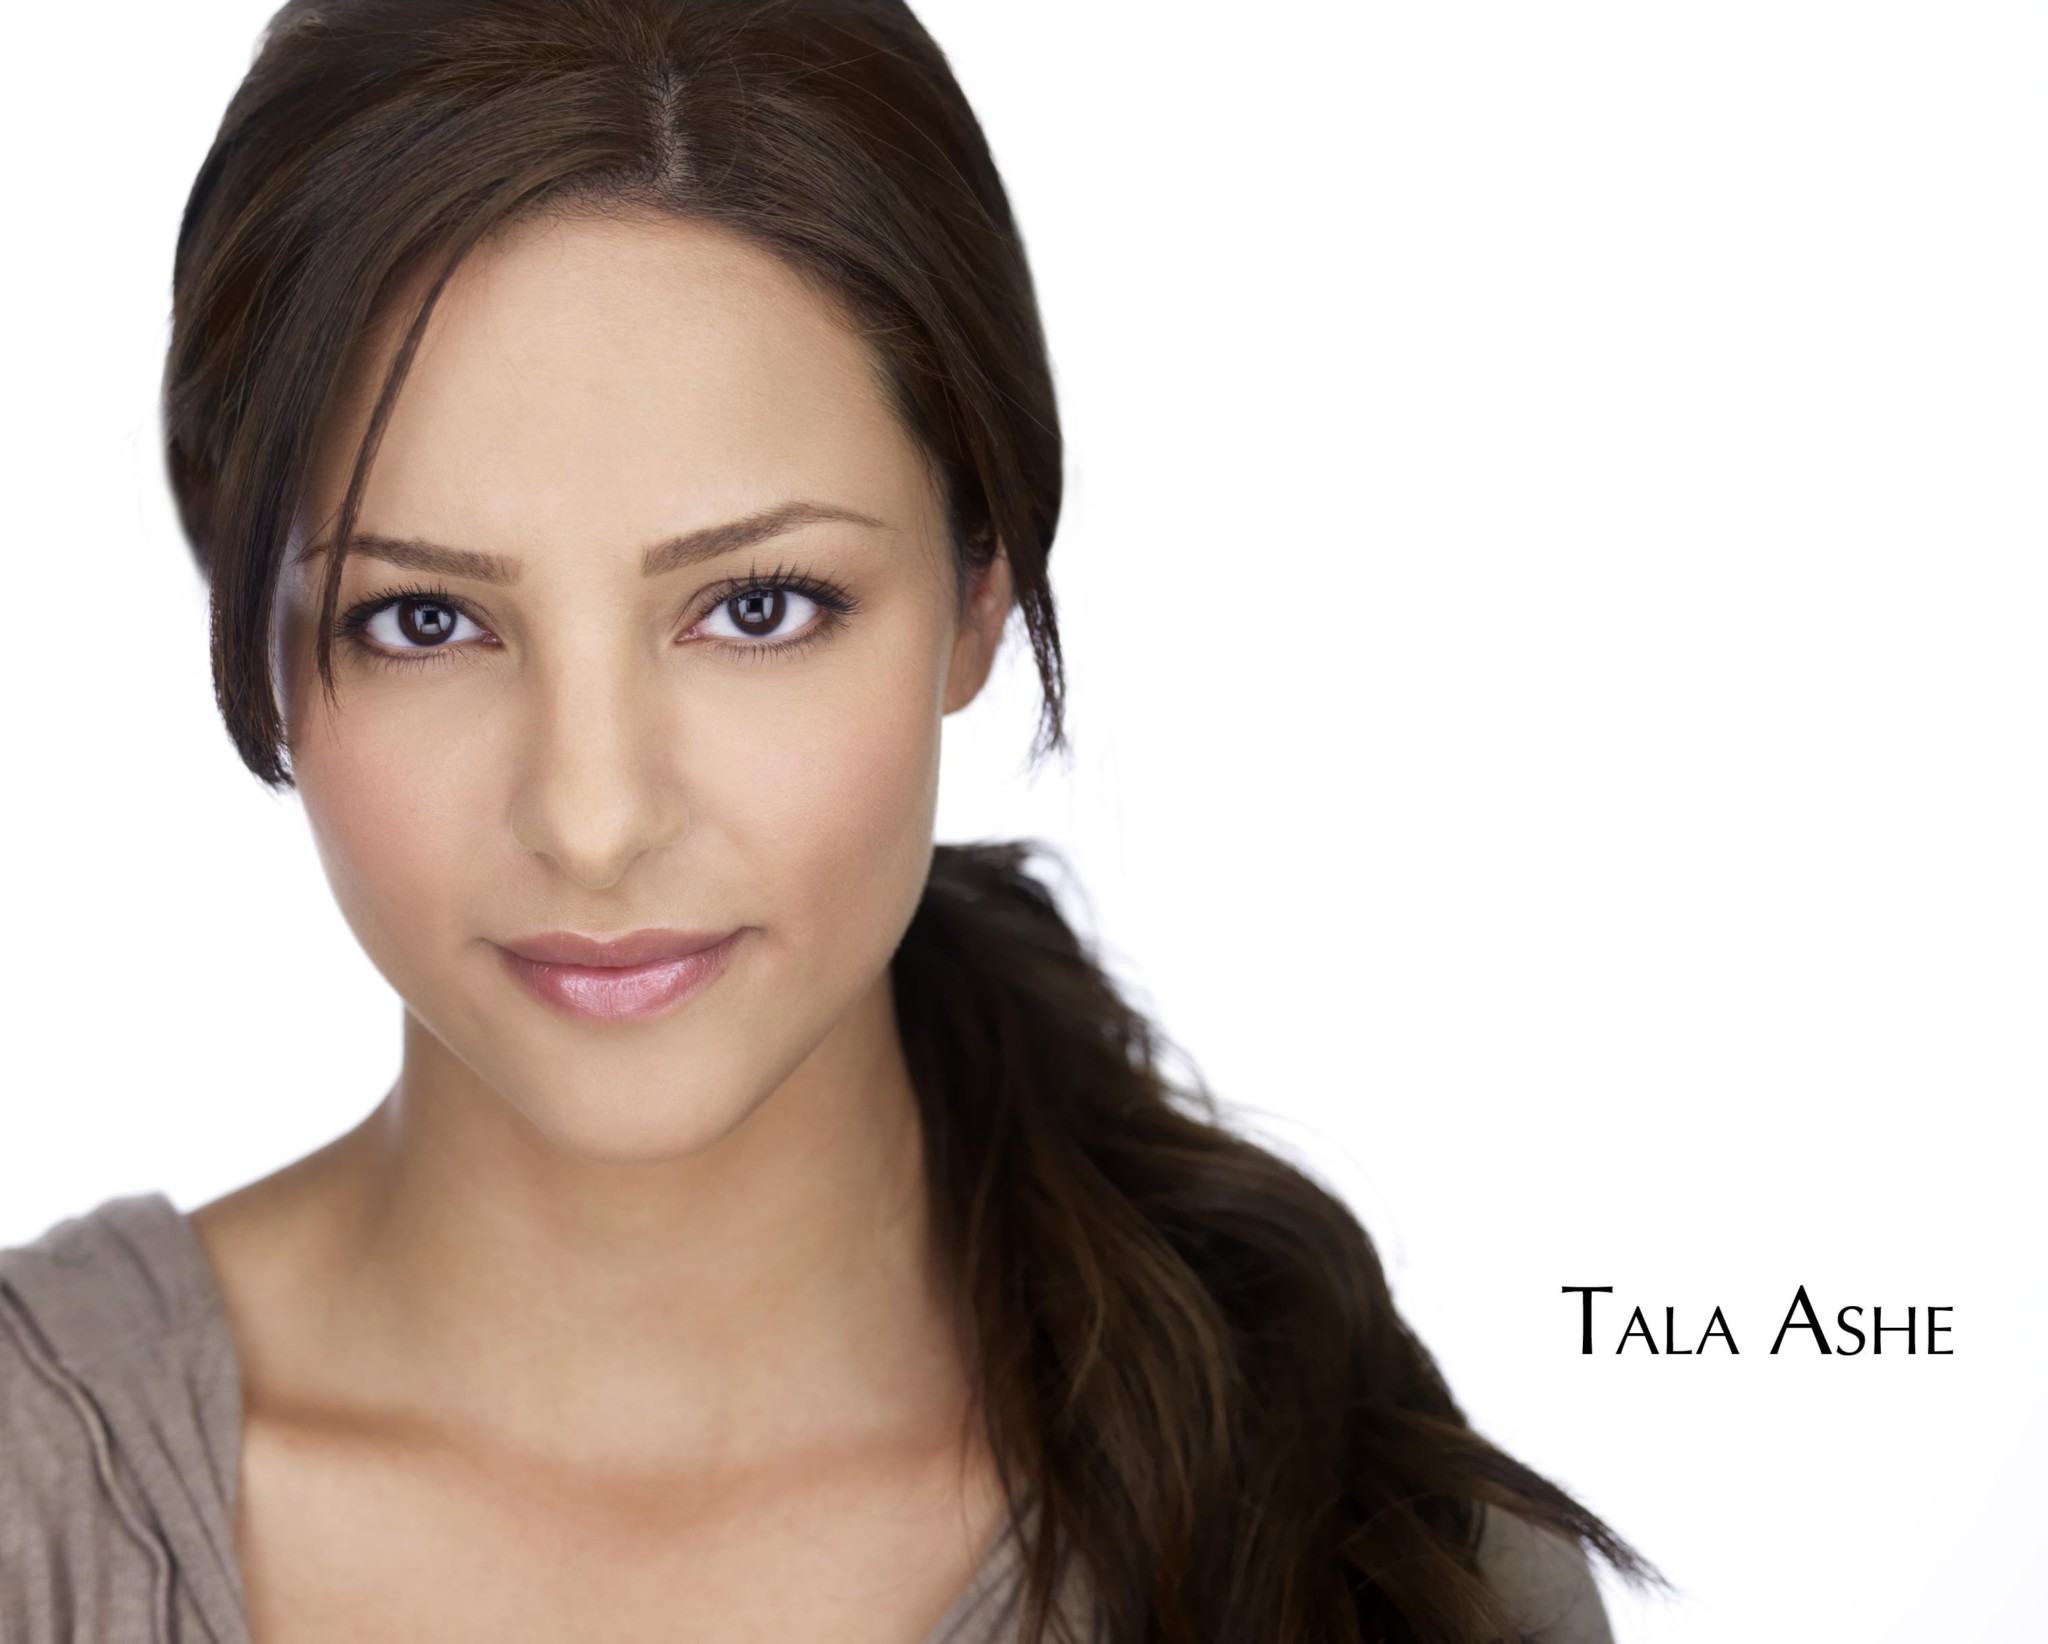 Tala Ashe will be a series regular in Season 3 of DC's Legends of Tomo...